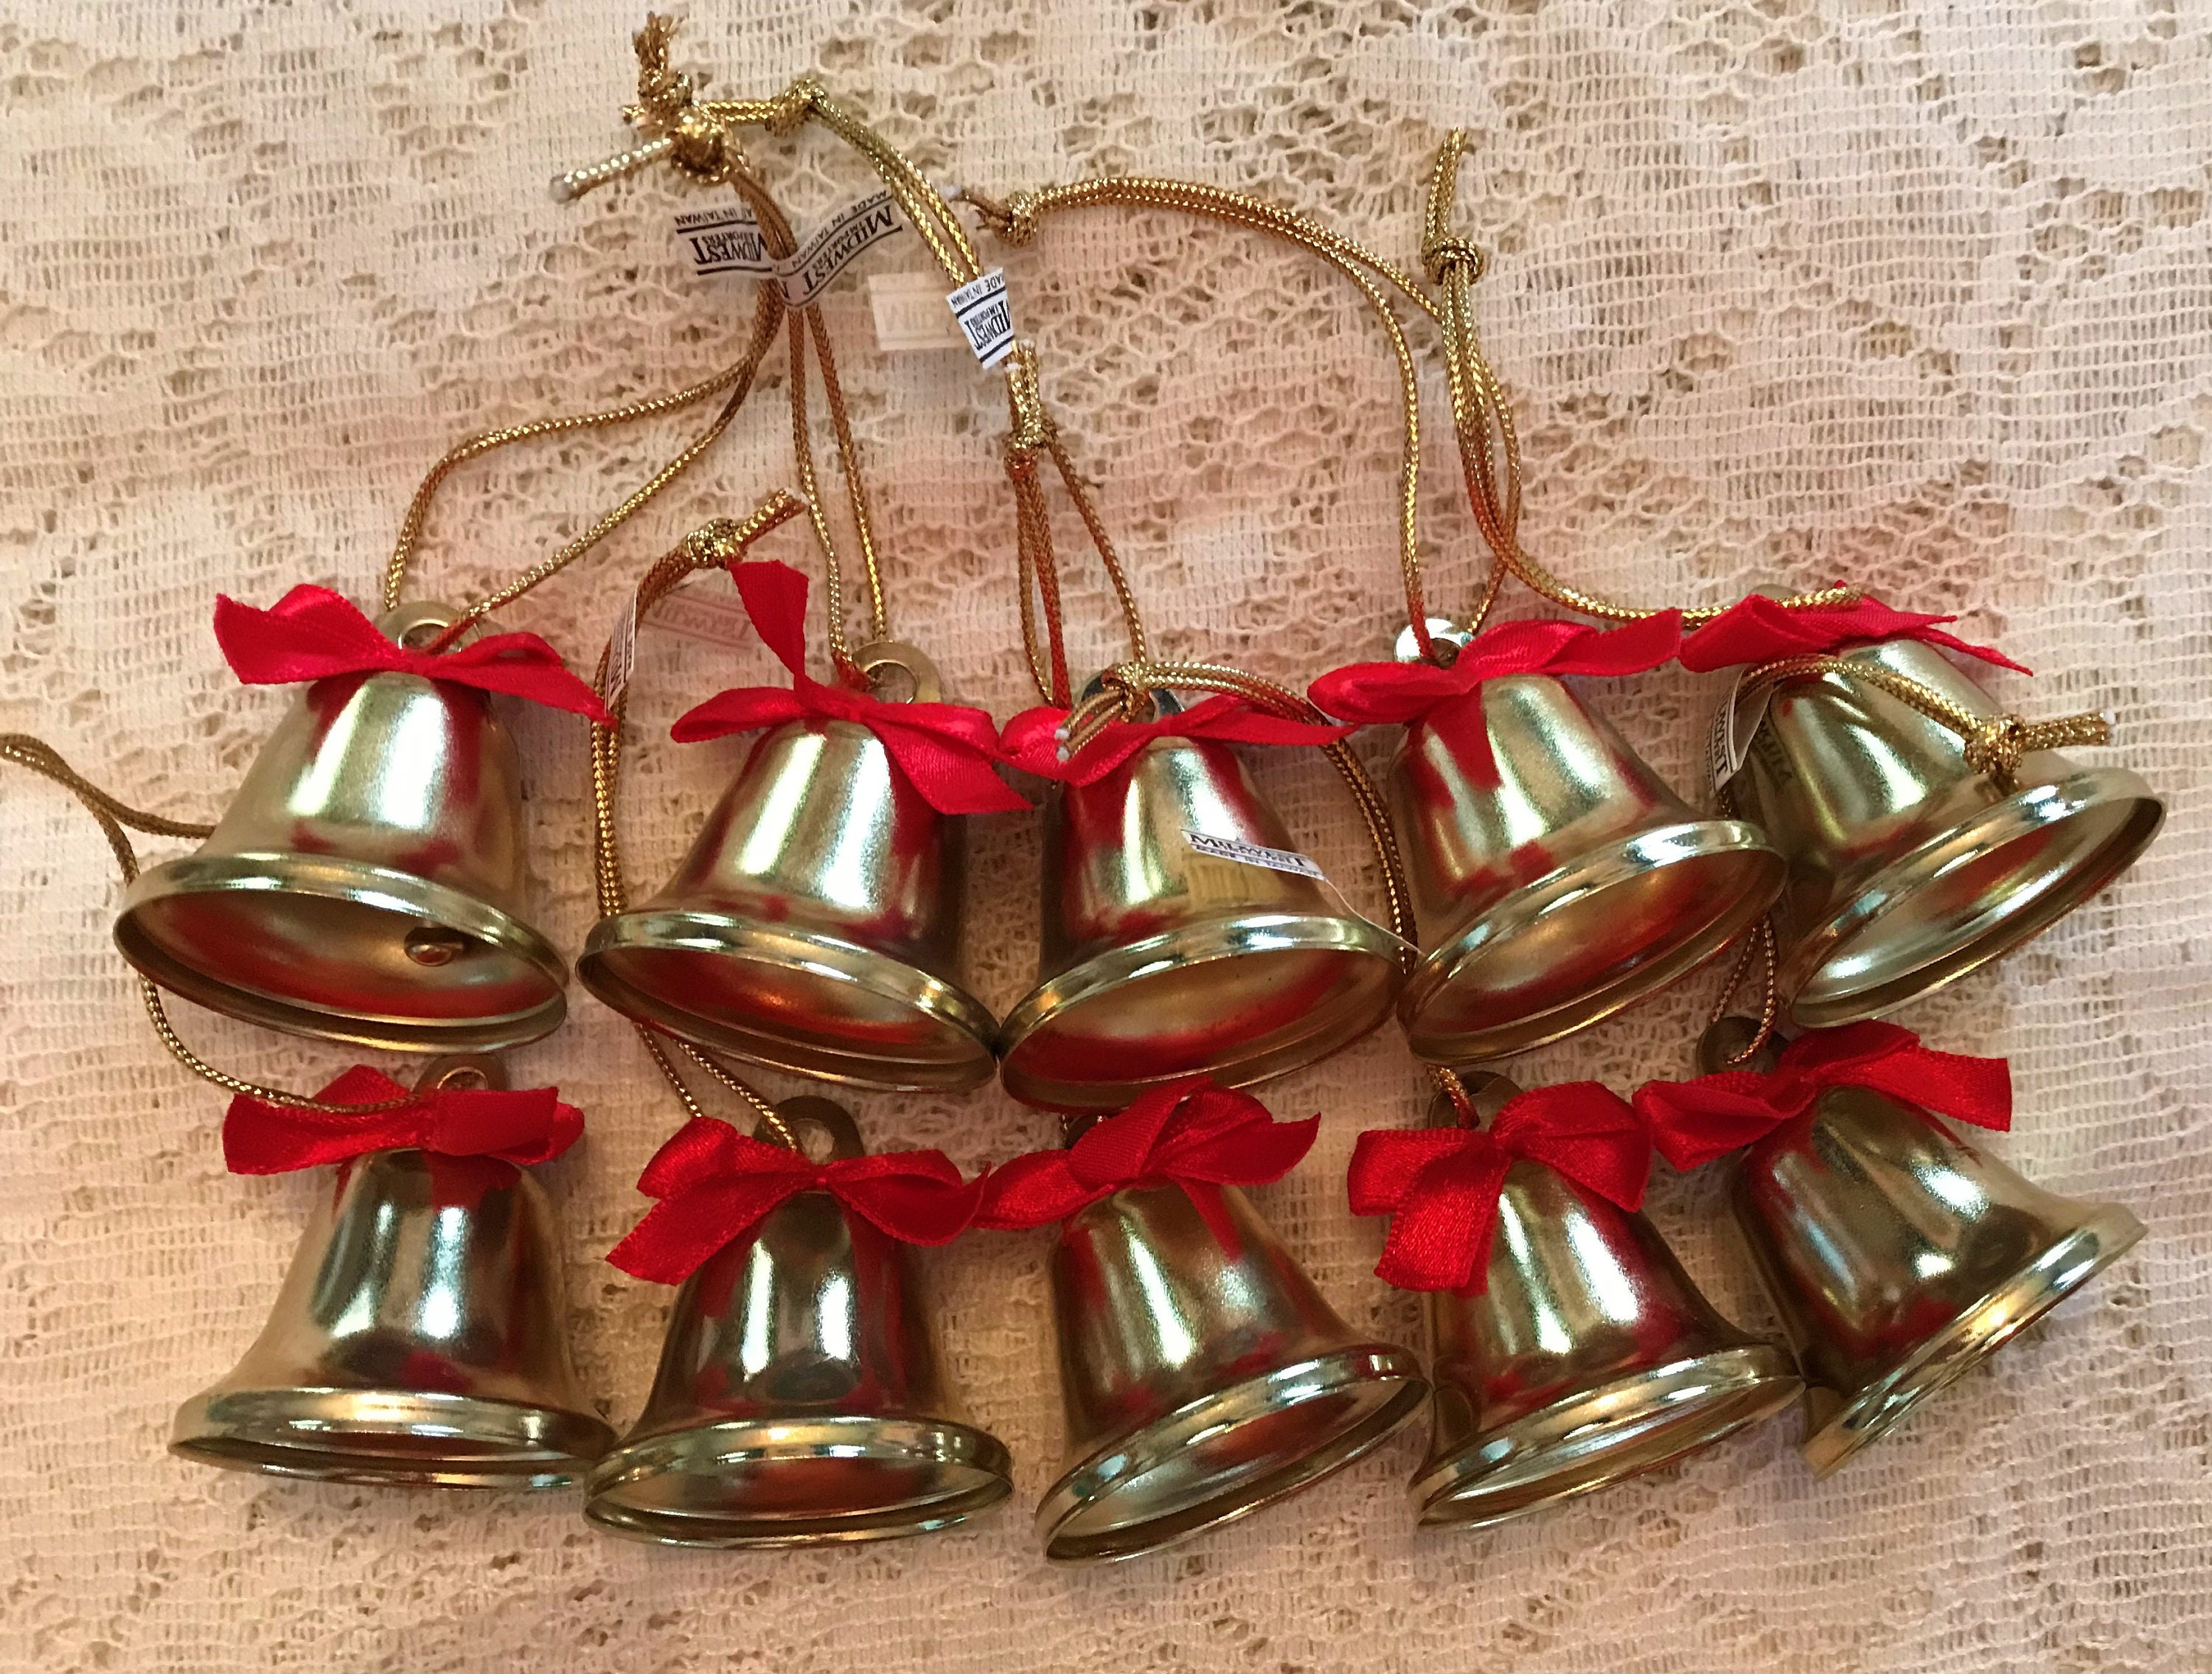 Piao Small Bells, 20 Pieces Vintage Small Bell For Wedding Festival